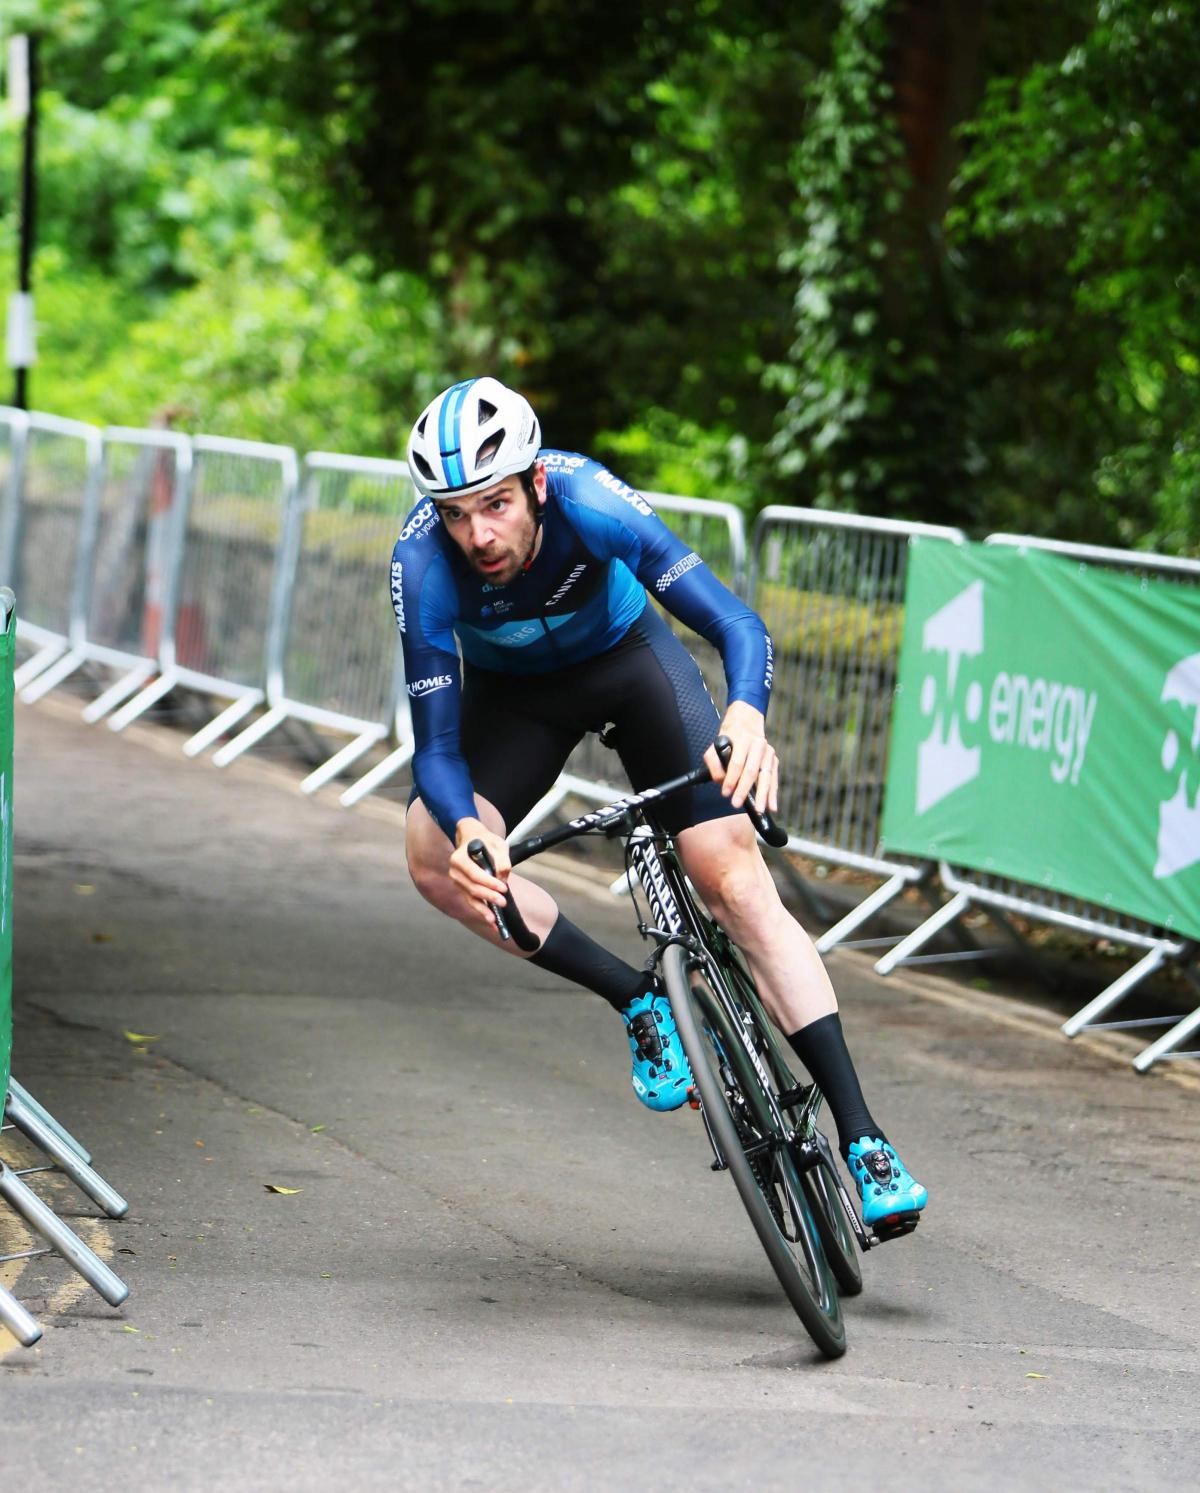 RACE: OVO Energy Tour Series returns to Durham. Pictured riders in the hill climb race Picture: SARAH CALDECOTT